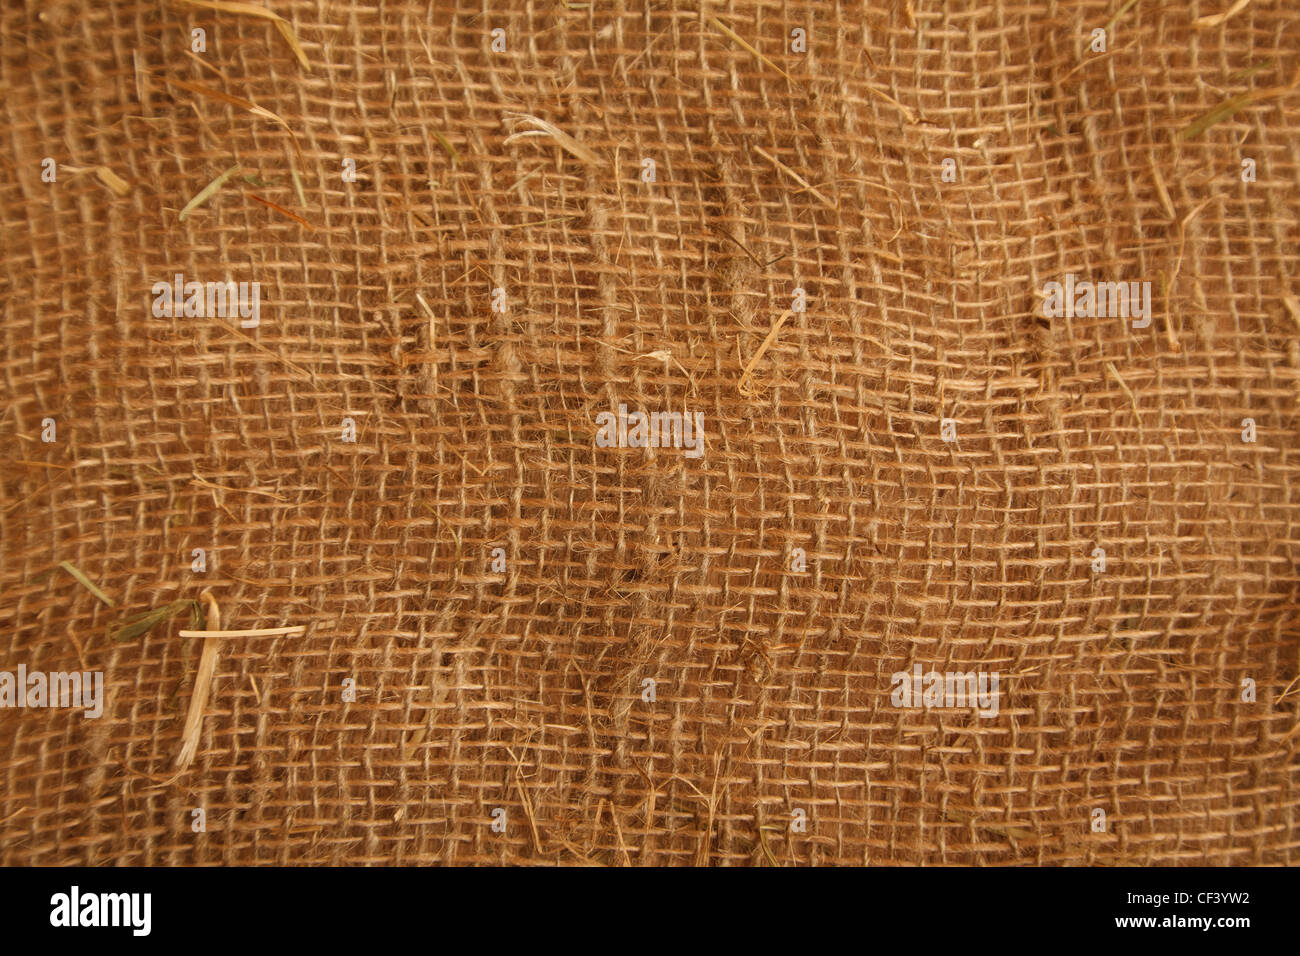 Texture high resolution of brown color of coarse cloth. Close up. Horizontal format. Stock Photo